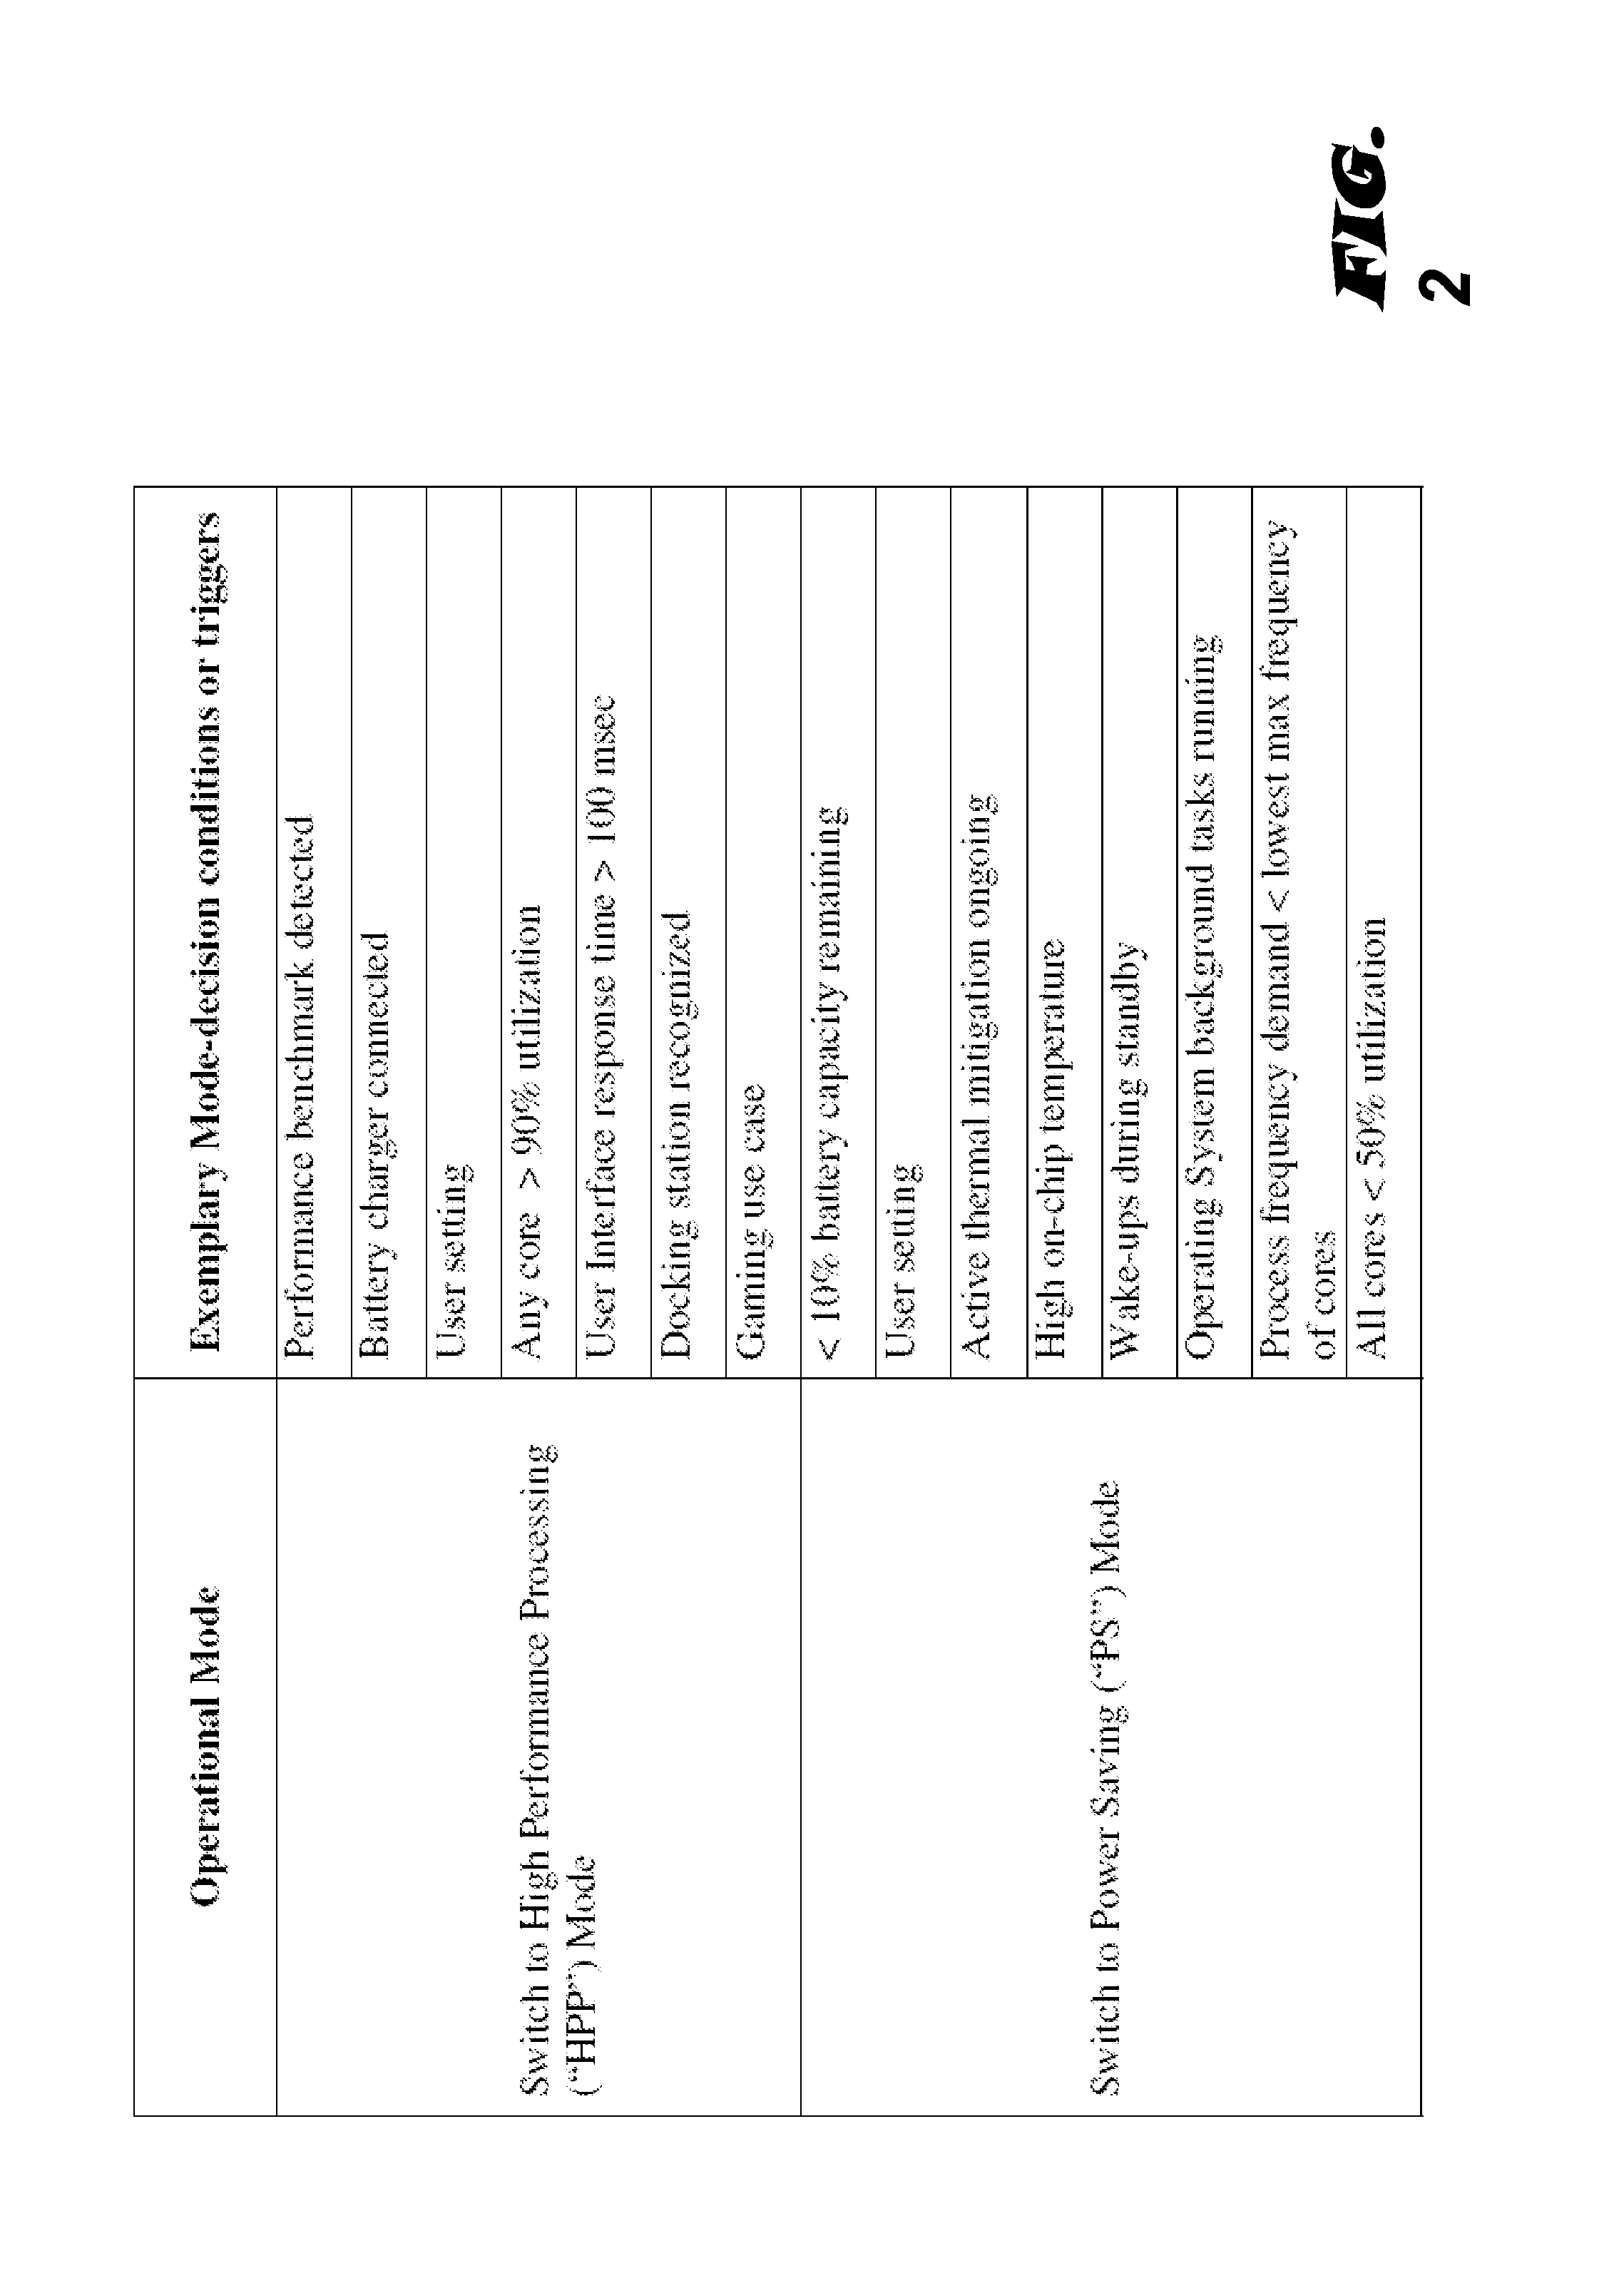 Modal workload scheduling in a heterogeneous multi-processor system on a chip